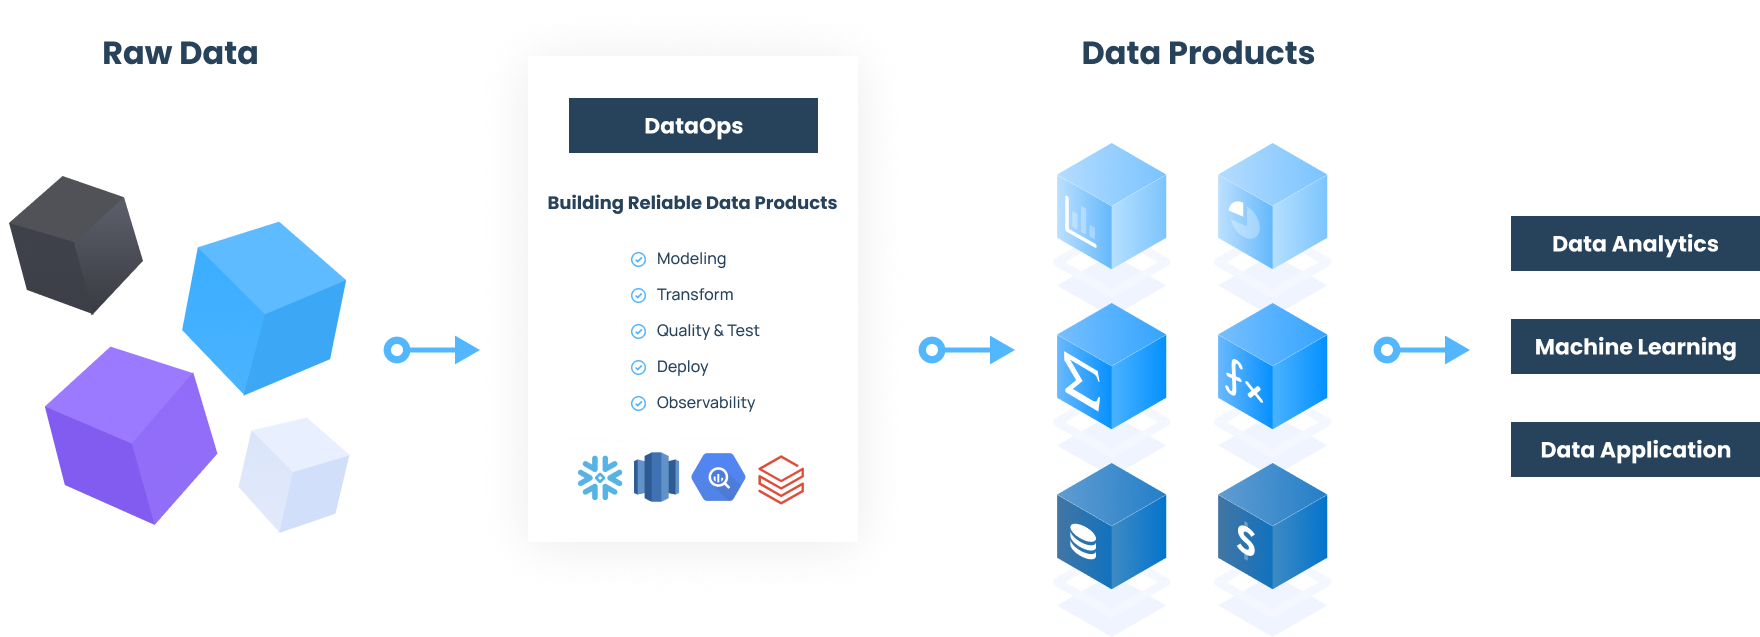 triggo.ai |DataOps, Building Reliable Data Products, Modeling, Transform, Quality & Test, Deploy, Observability